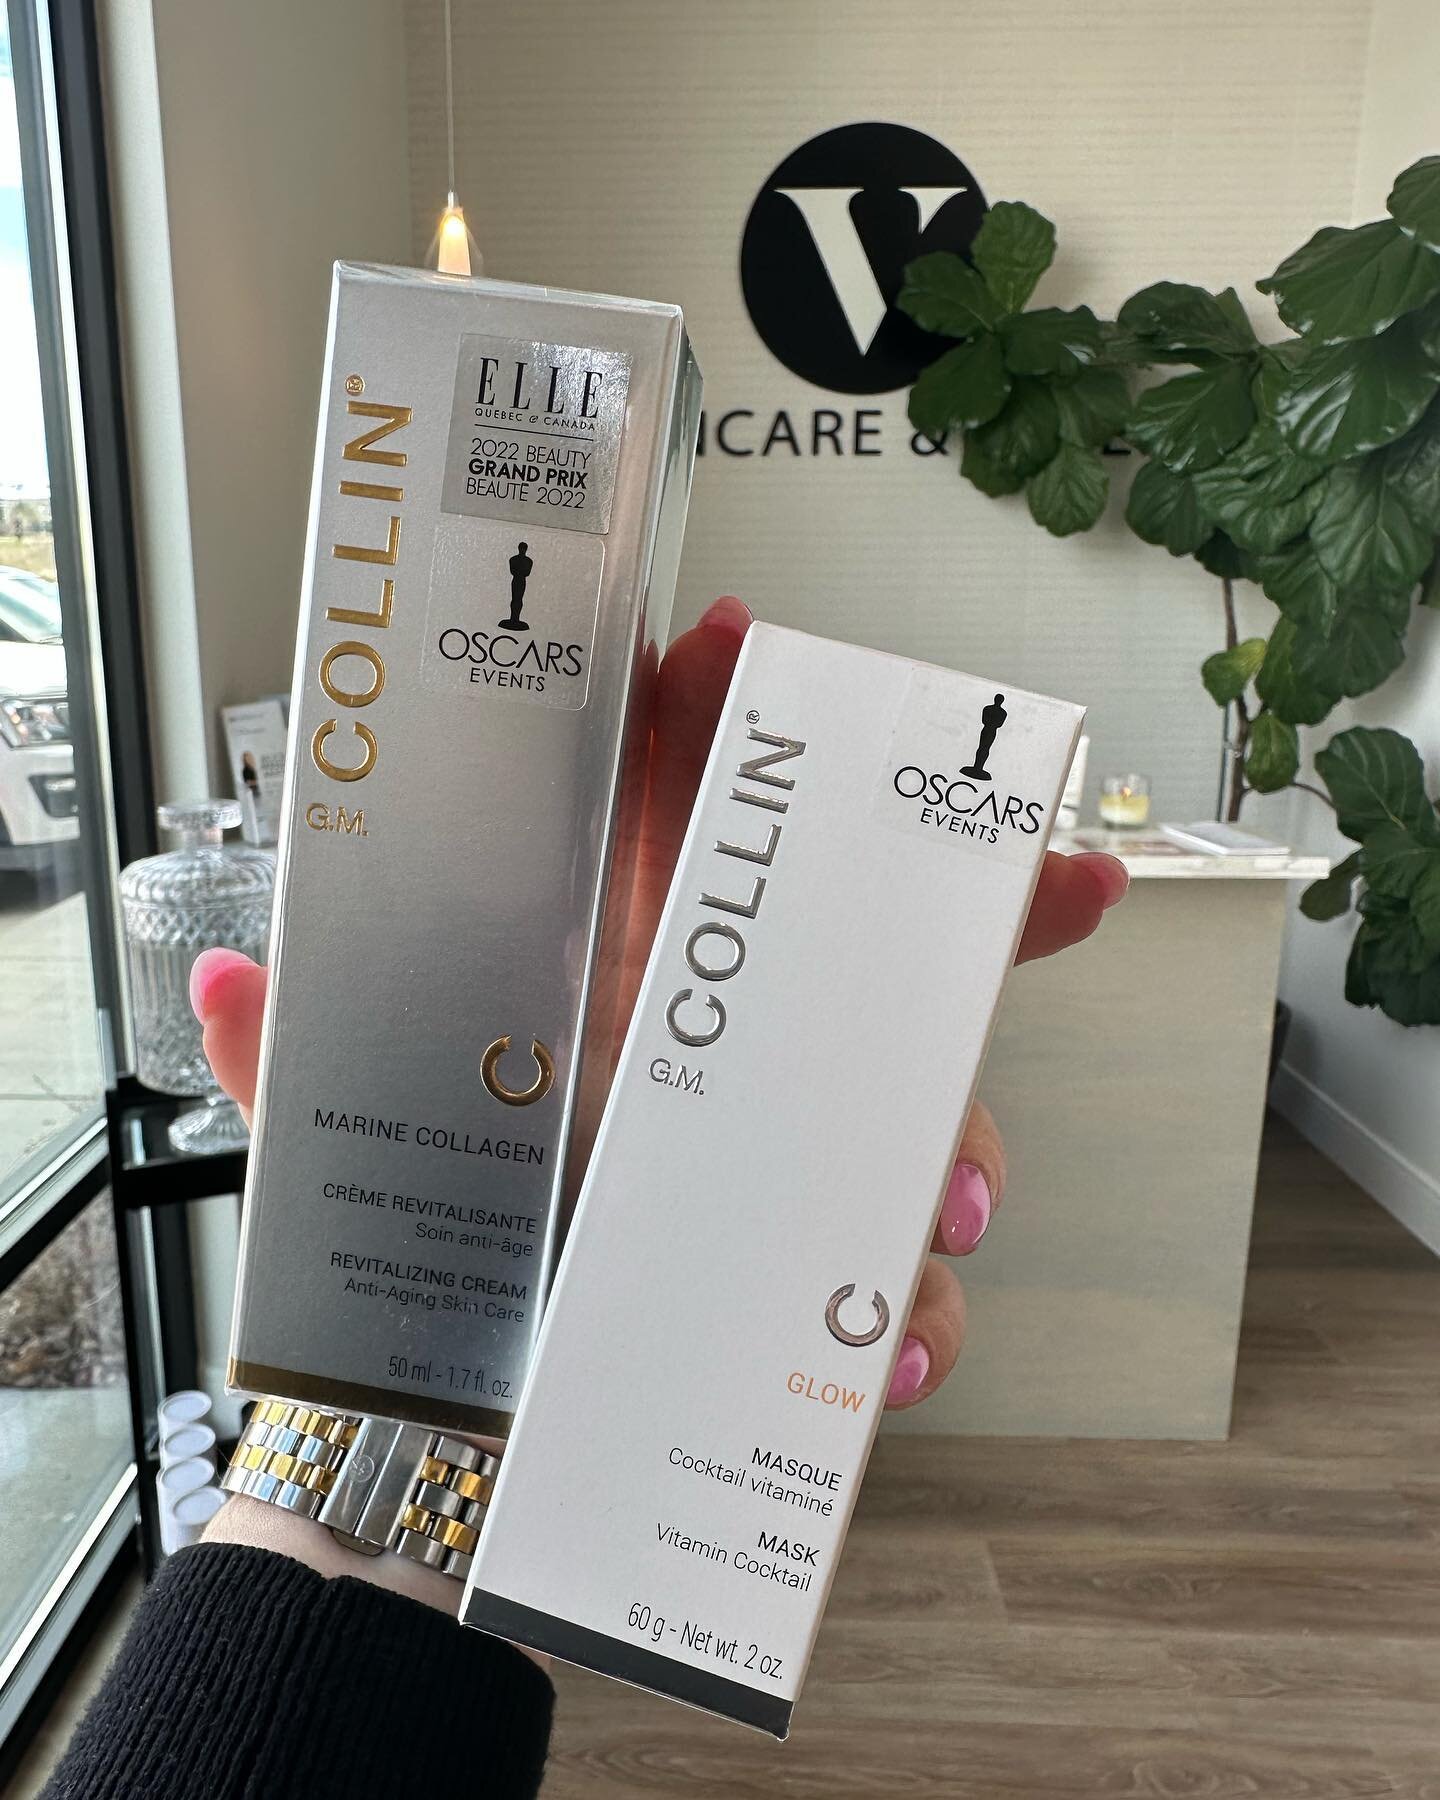 Did you know we are the only Spa in Idaho that carries the French brand G.M Collin?! They have been treating celebrities at the Oscars since 2005 and are included in the infamous Oscar swag bags. G.M Collin is luxurious, effective and can be yours to